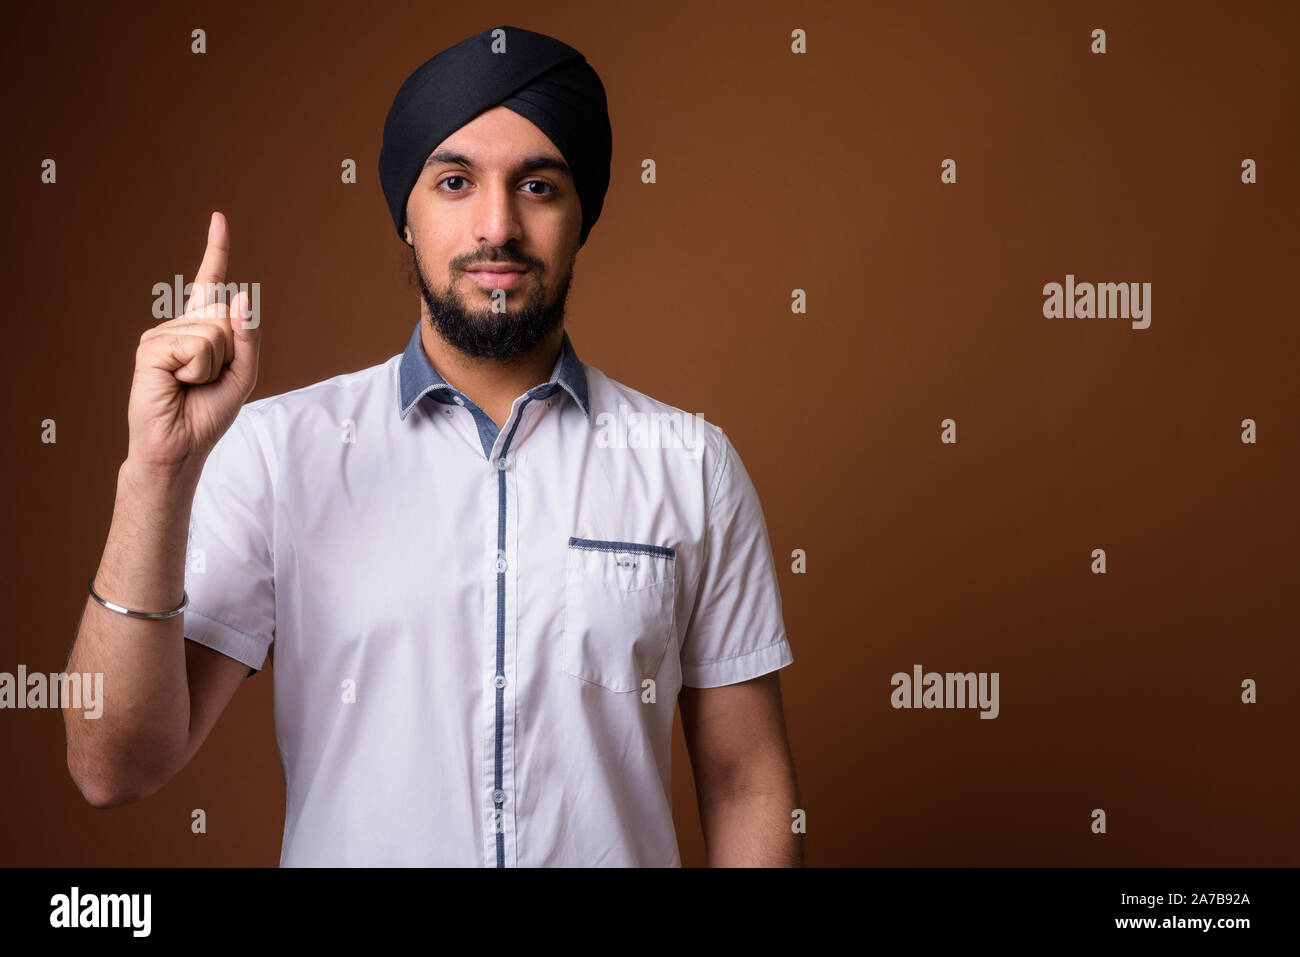 Young bearded Indian Sikh man wearing turban Stock Photo